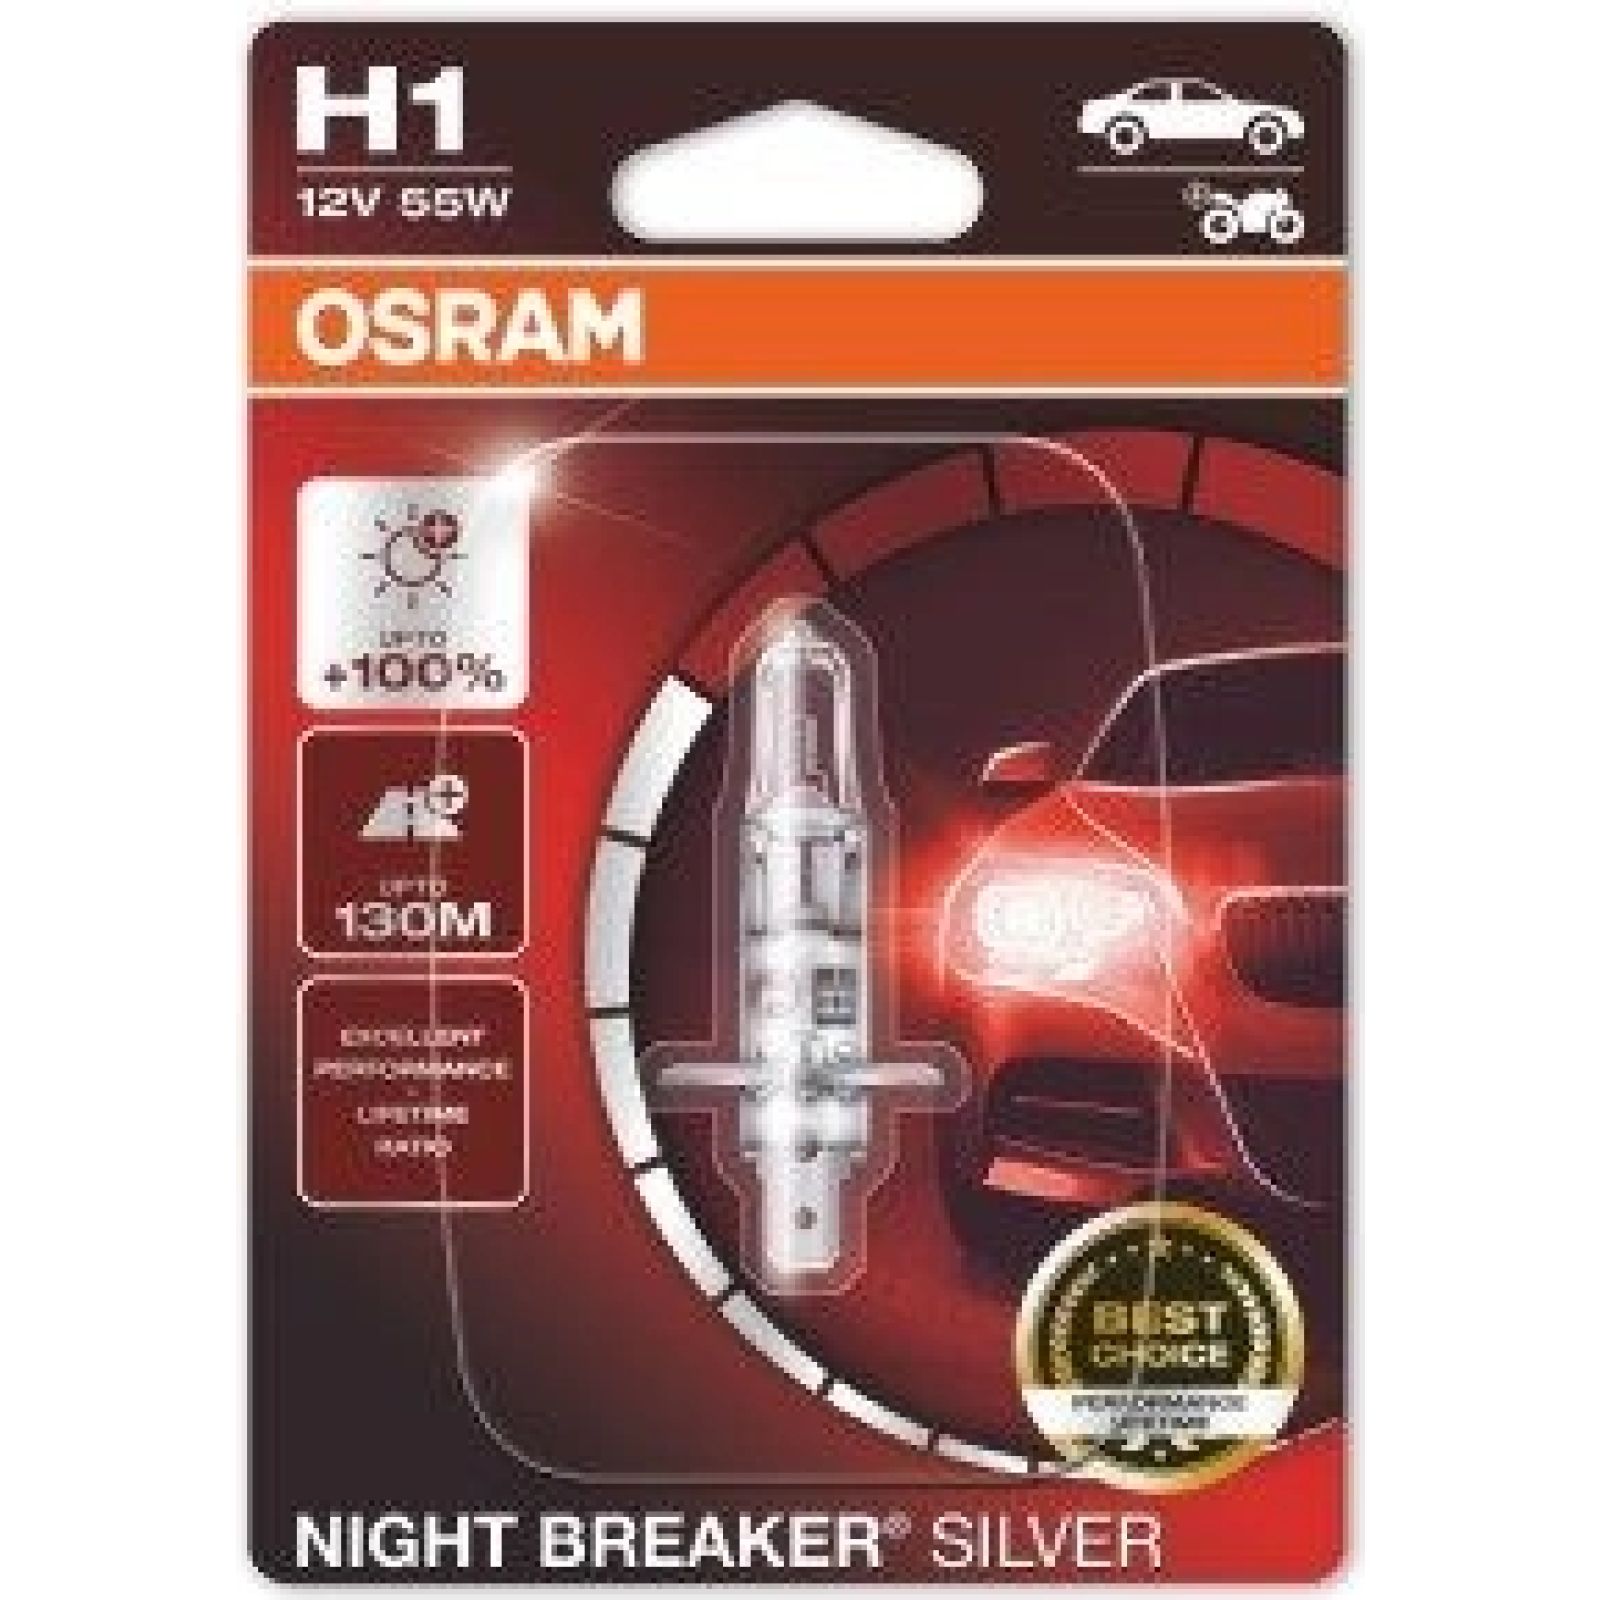 https://www.autoteile-store.at/img/product/h1-osram-12v-55w-p145s-nbs-night-breaker-silver-night-breaker-r-silver-64150nbs-01b-200182/d7d4d1a31c3ea5af18aab0b2361cb6b2_1600.jpg